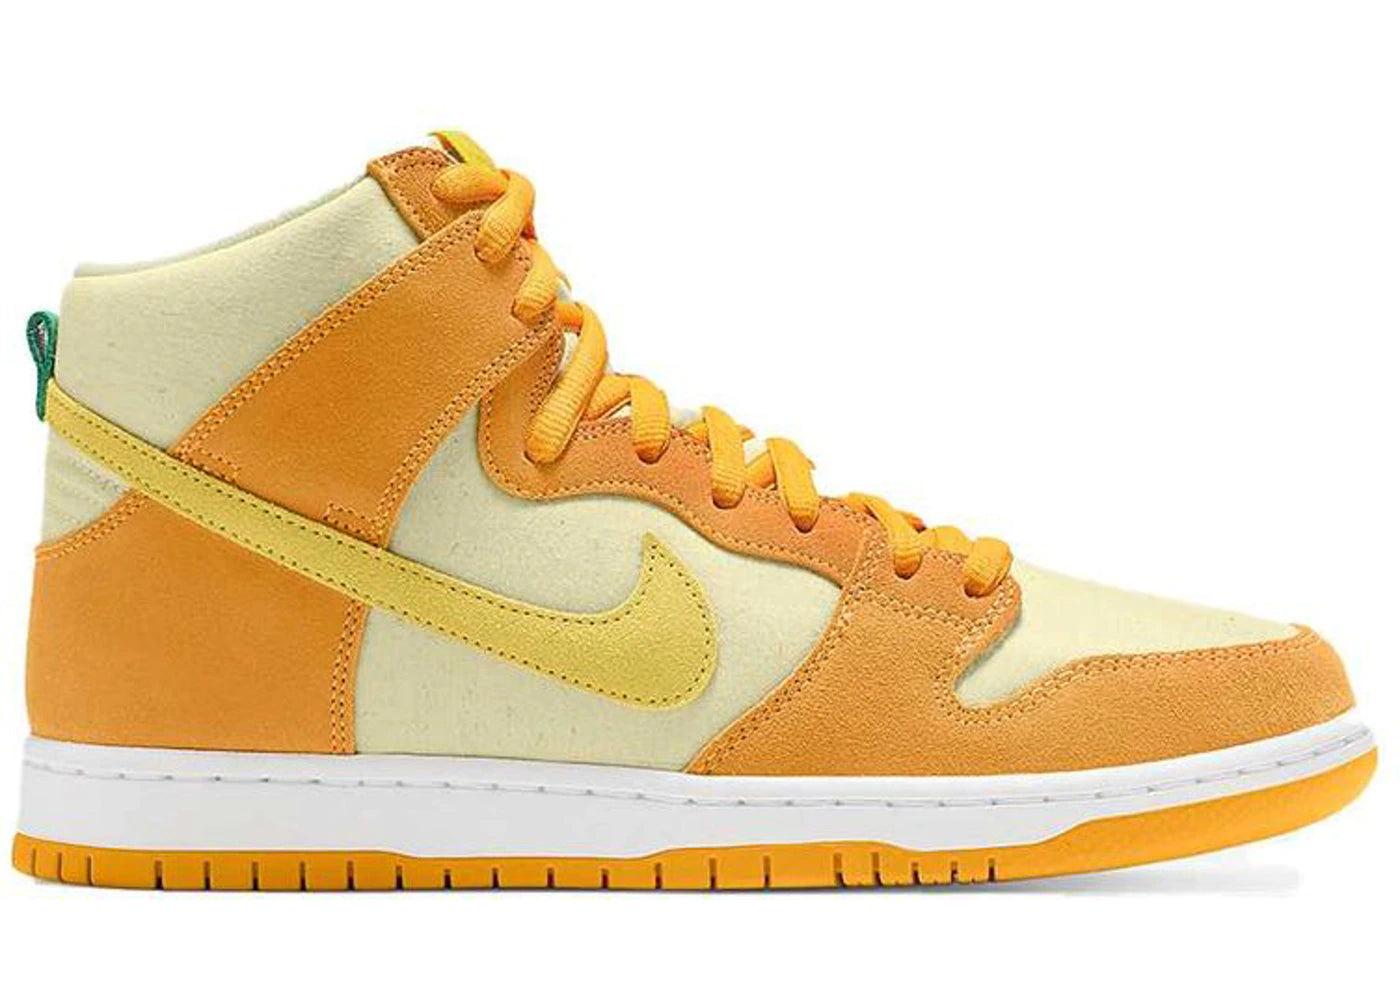 Nike Sb Dunk High Fruit Pack Pineapple in Yellow | Lyst